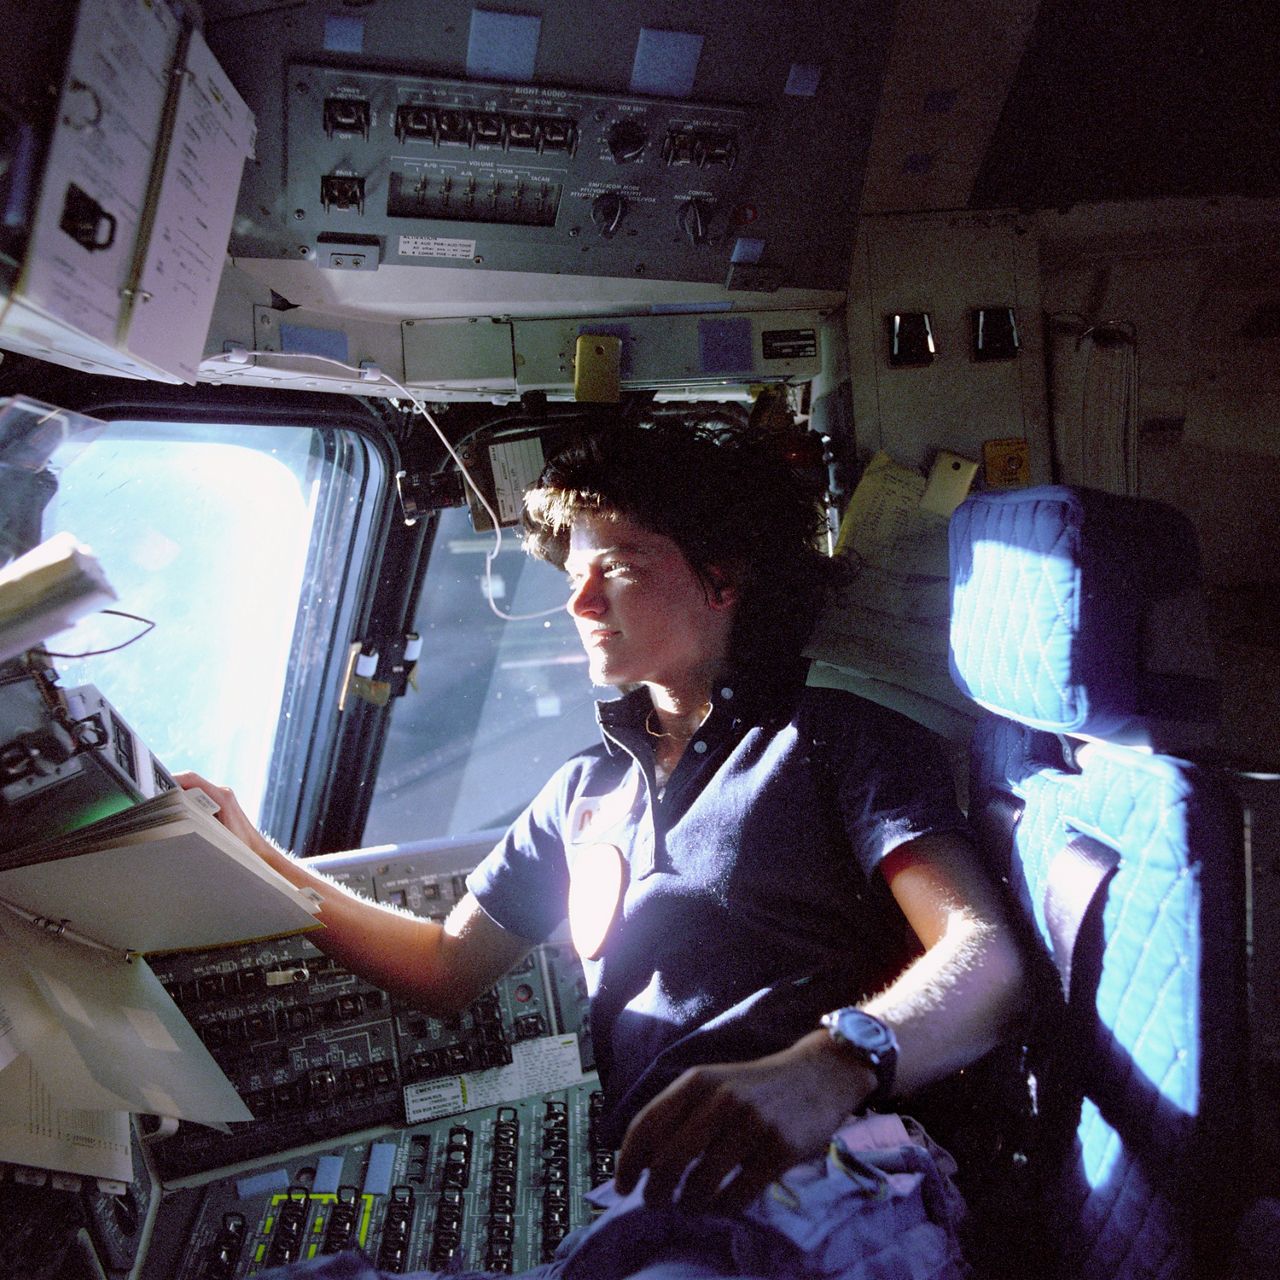 Sally Ride in the cockpit of the space shuttle Challenger during mission STS-41-G in 1984.